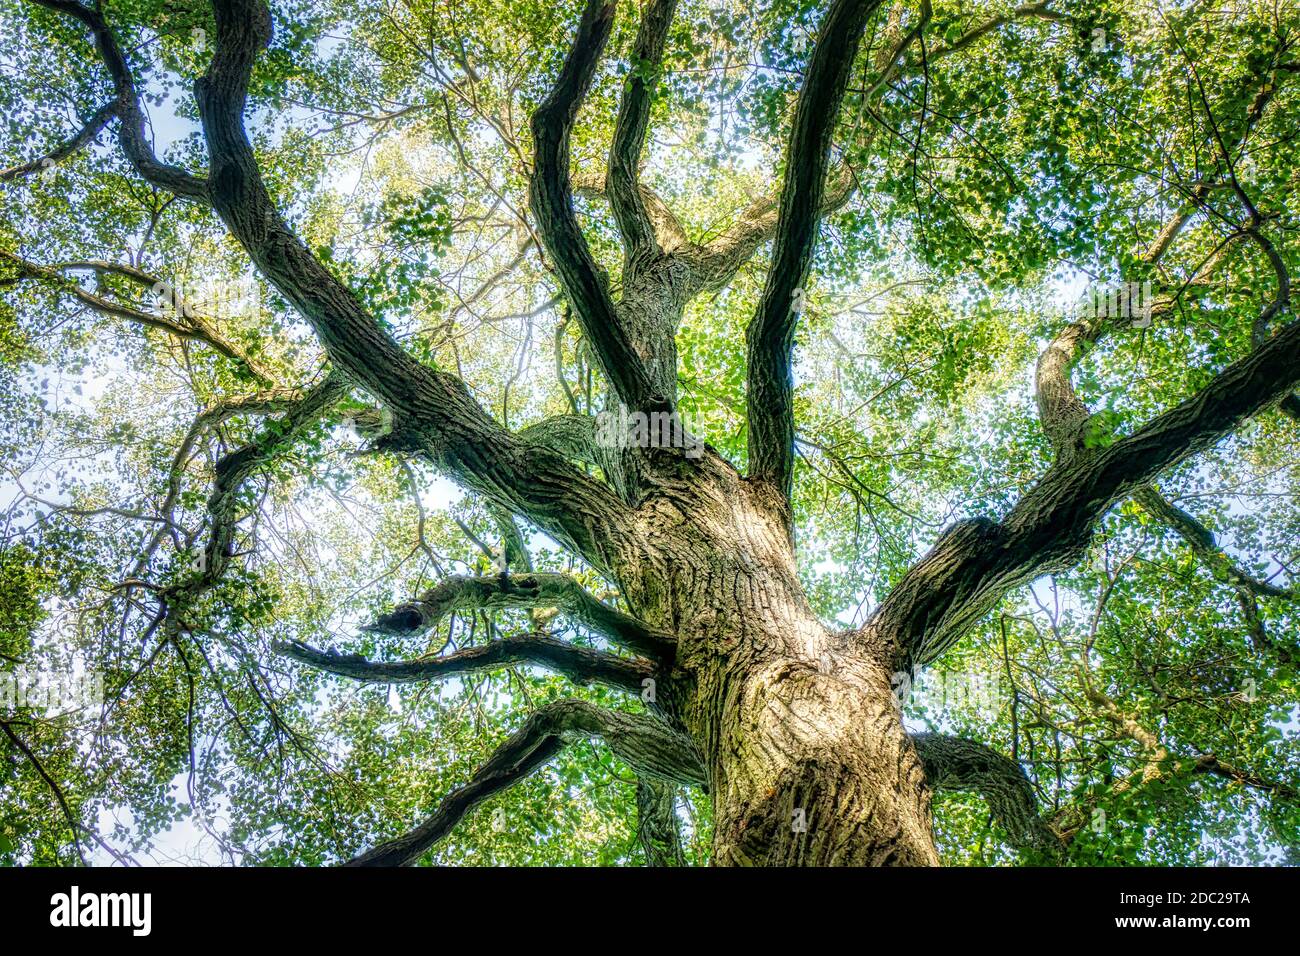 The Trunk of Old Linden Tree. Lower Angle of Linden Tree Foliage in Sunlight. Stock Photo